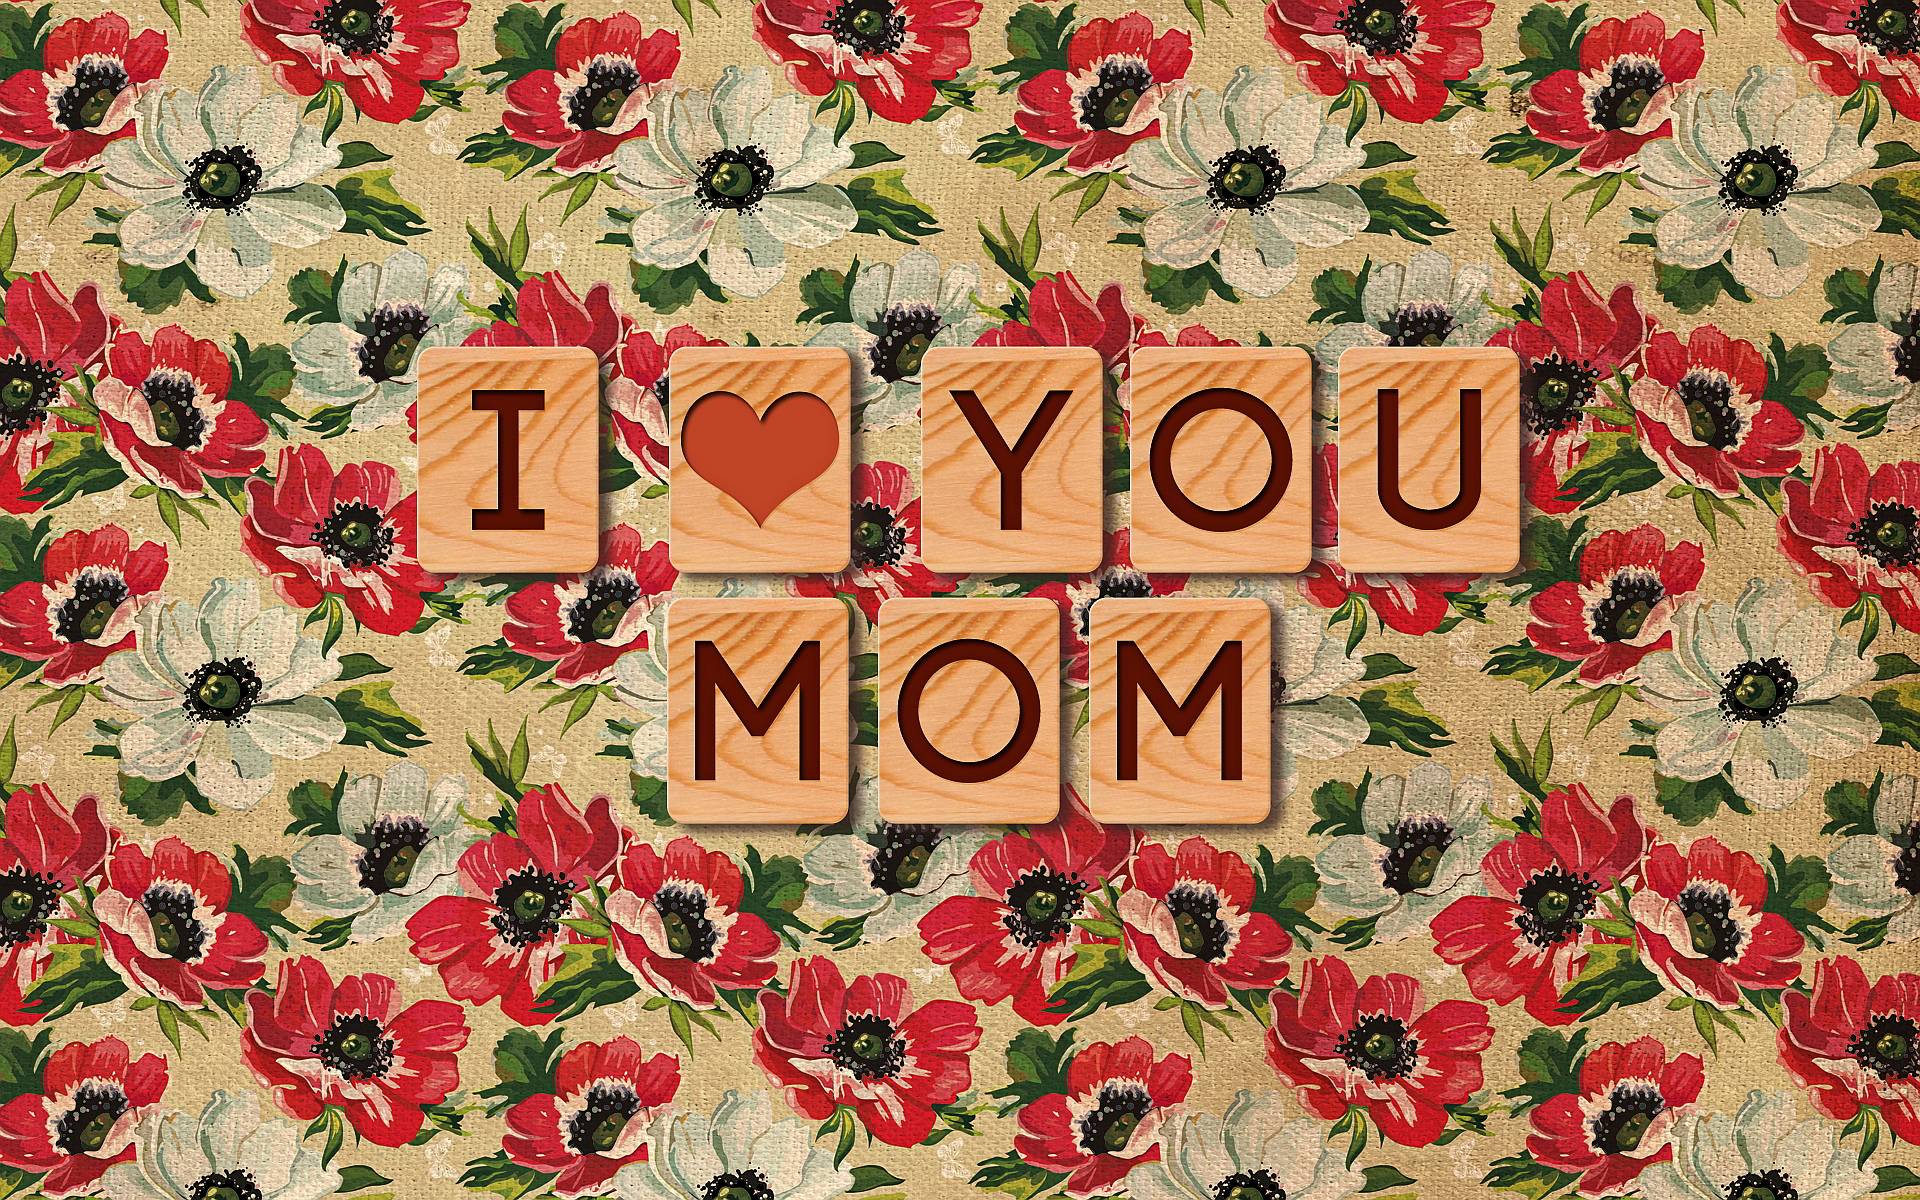 I Love Mom Cool Picture 2014 2015. Tops HD Wallpaper